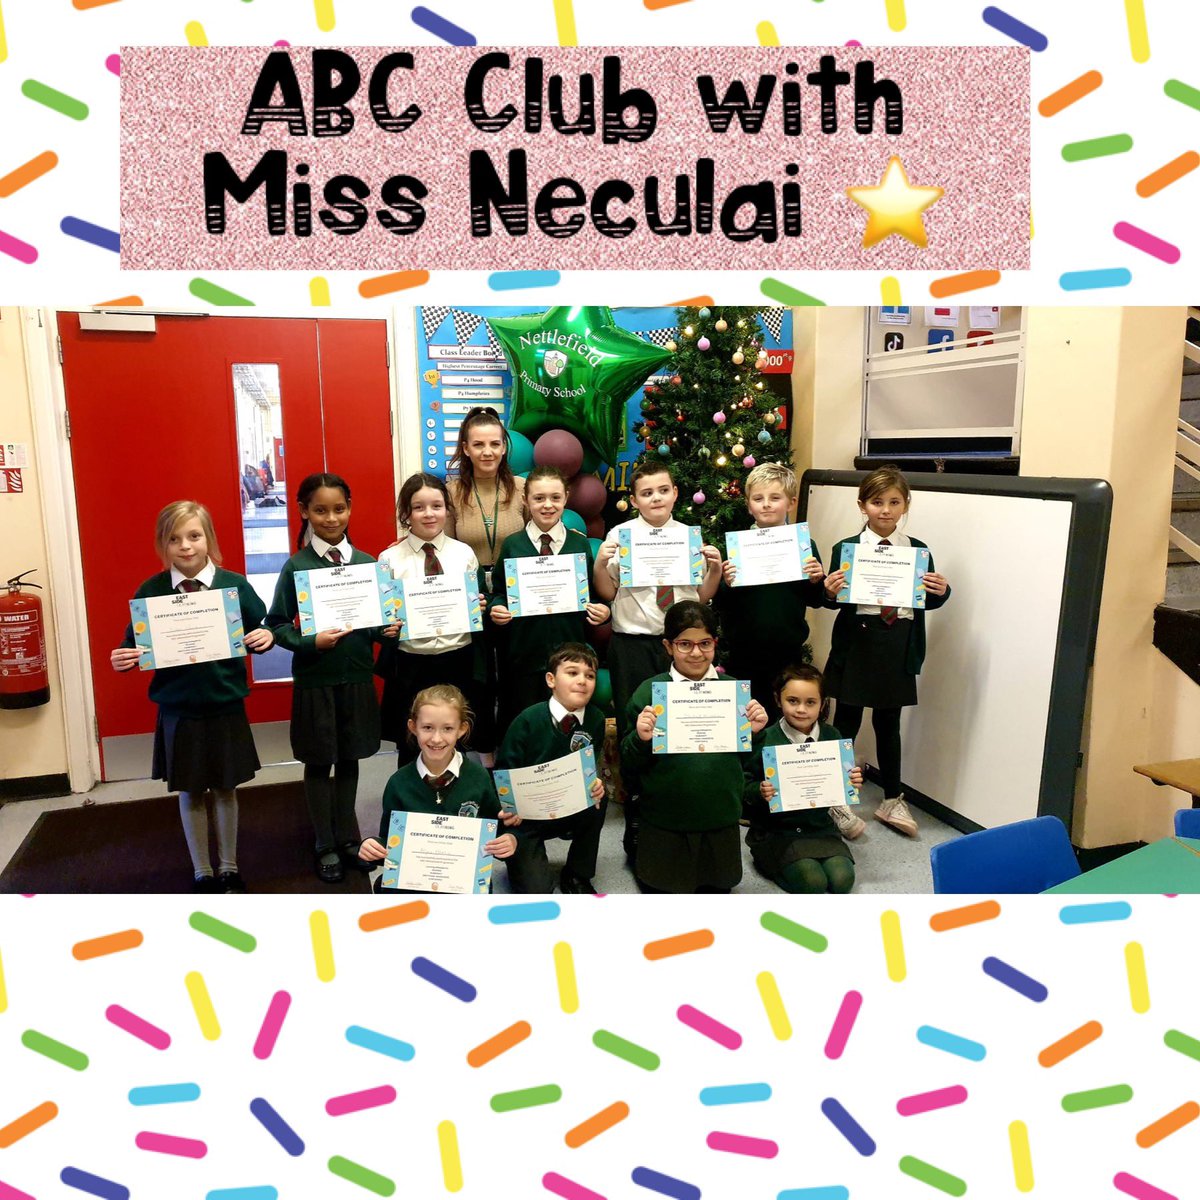 The ABC club was a fun 10 week programme that included learning-based activities and strategies to improve reading and numeracy, build confidence and emotional awareness ⭐️ Thank you to Eastside Learning for running it and Miss Neculai for helping at it! 🎉